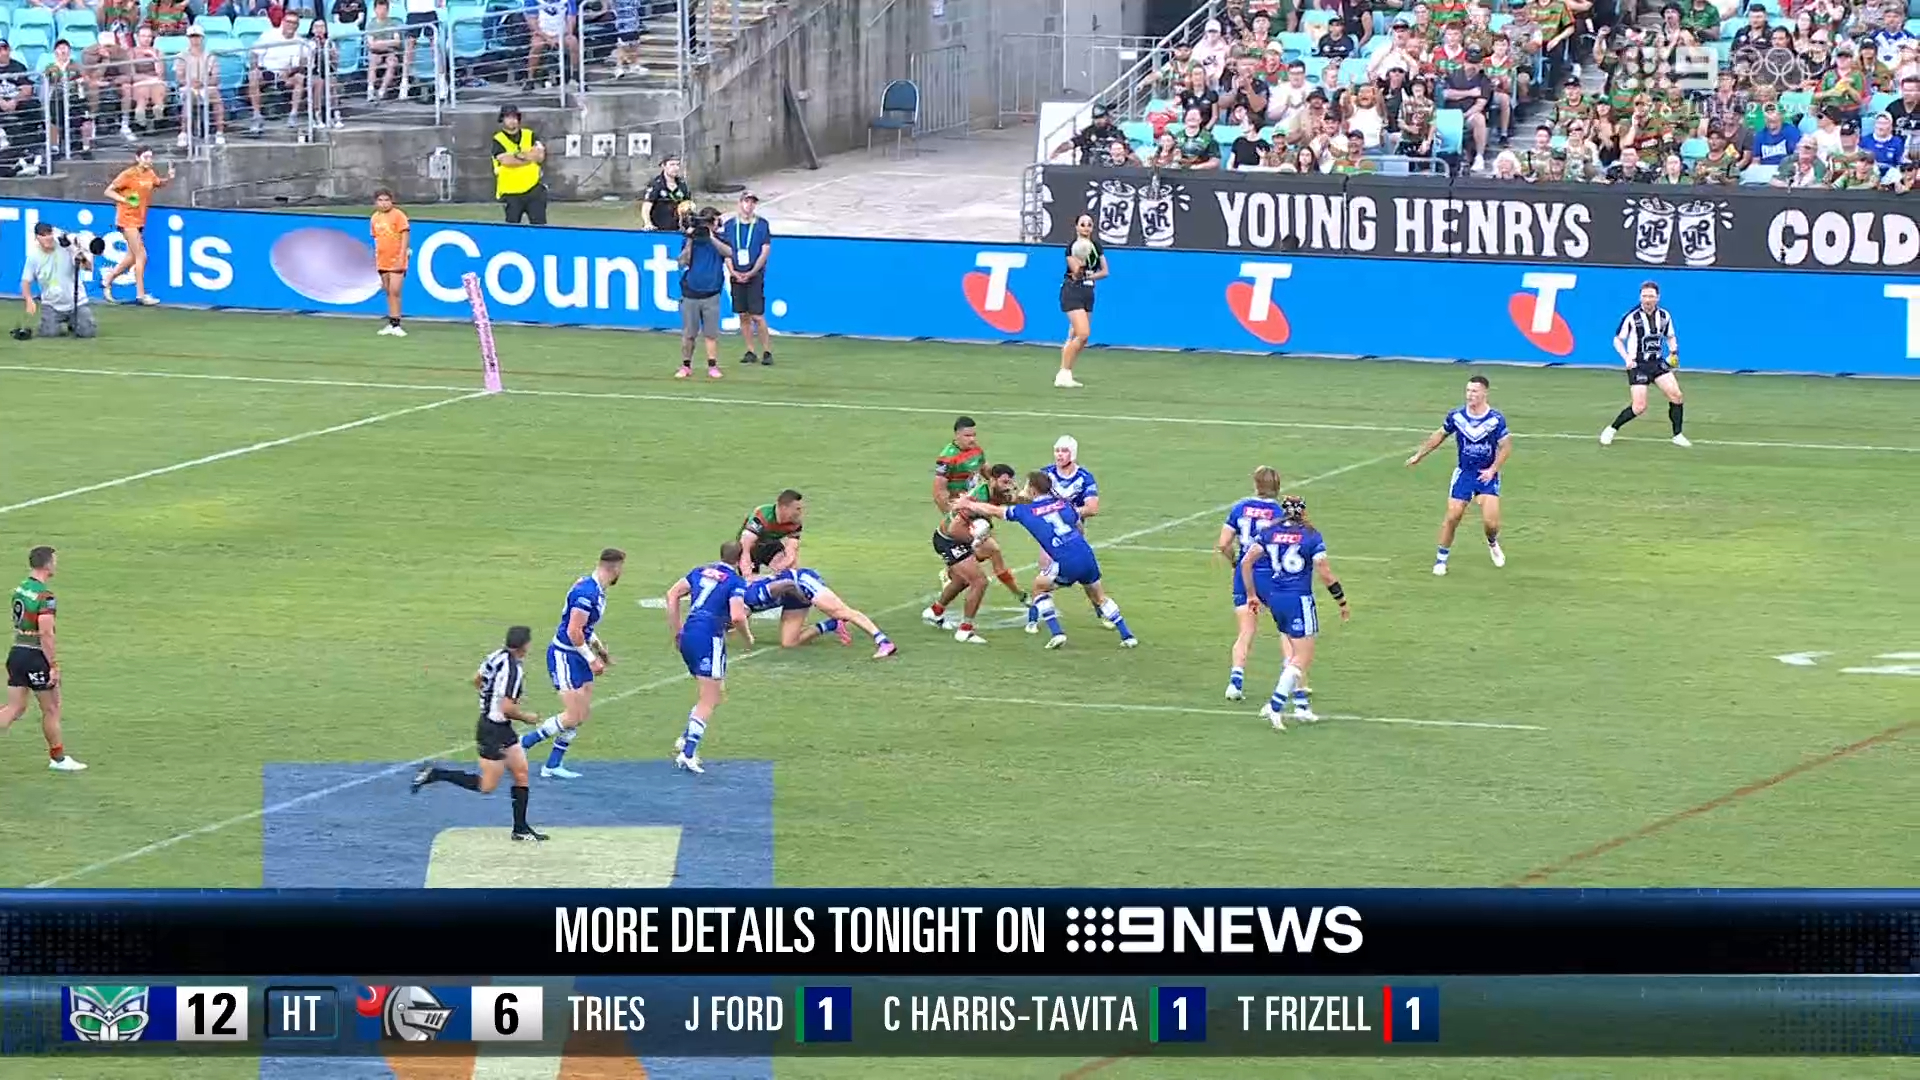 Try-scoring machine sidelined in huge blow for Souths